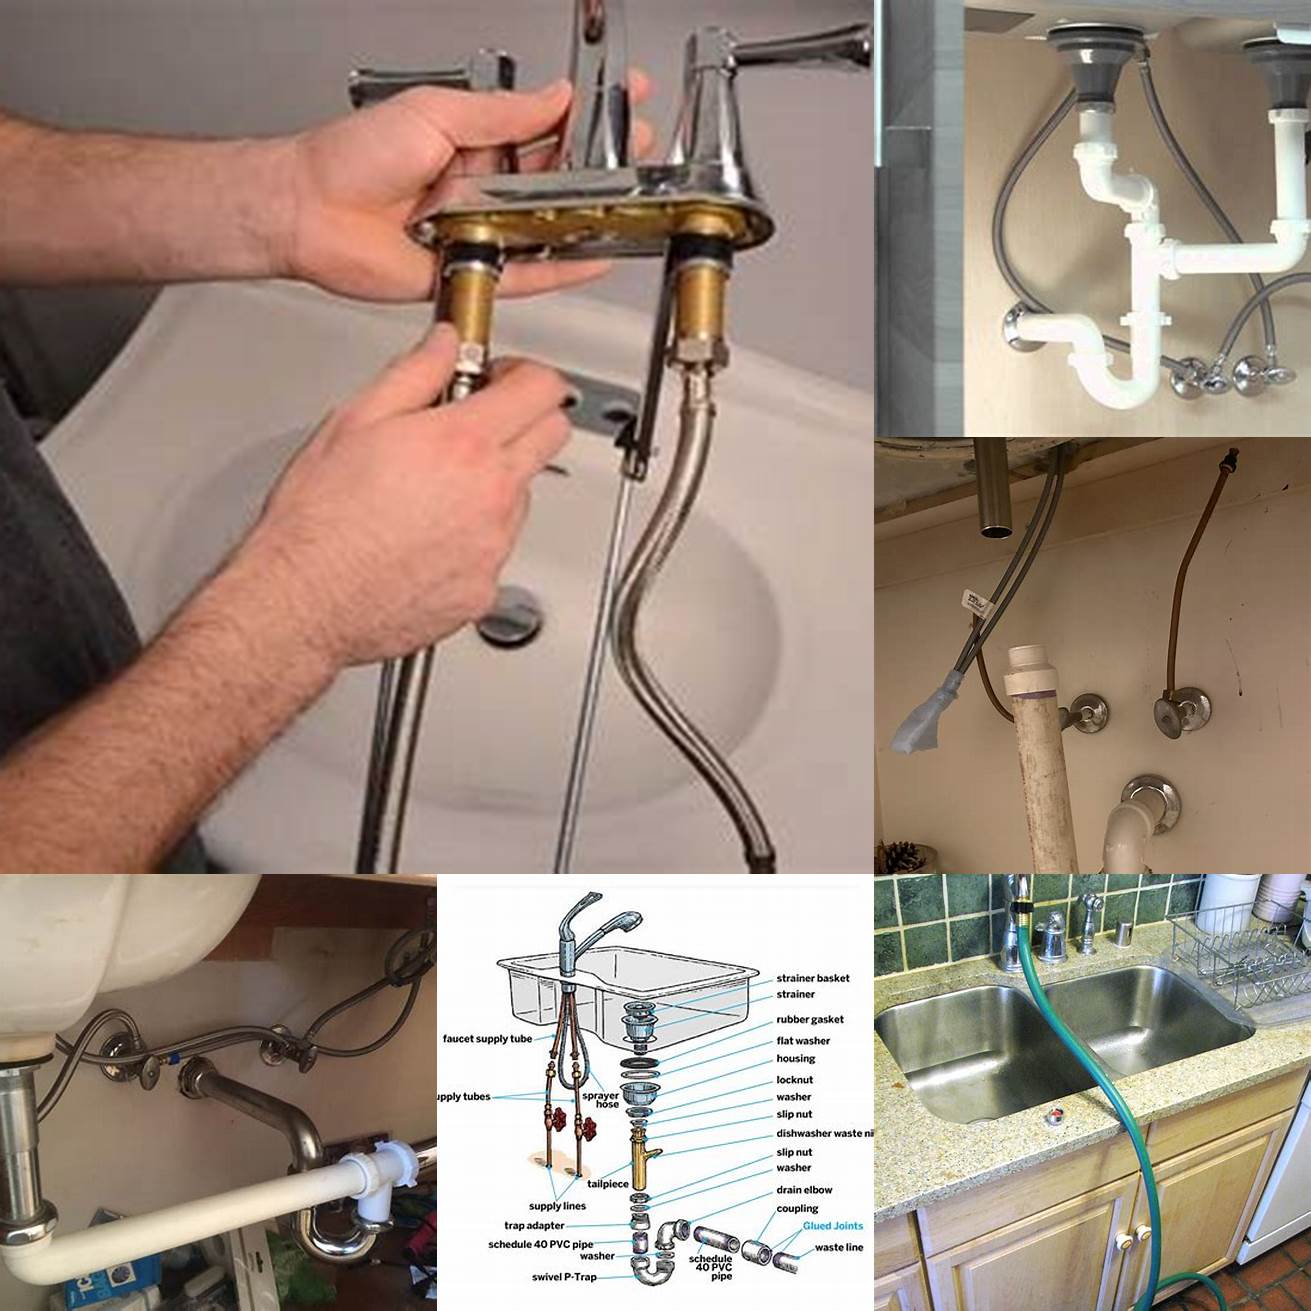 Attach the sink faucet and handles to the countertop and connect them to the drainpipes and water supply lines